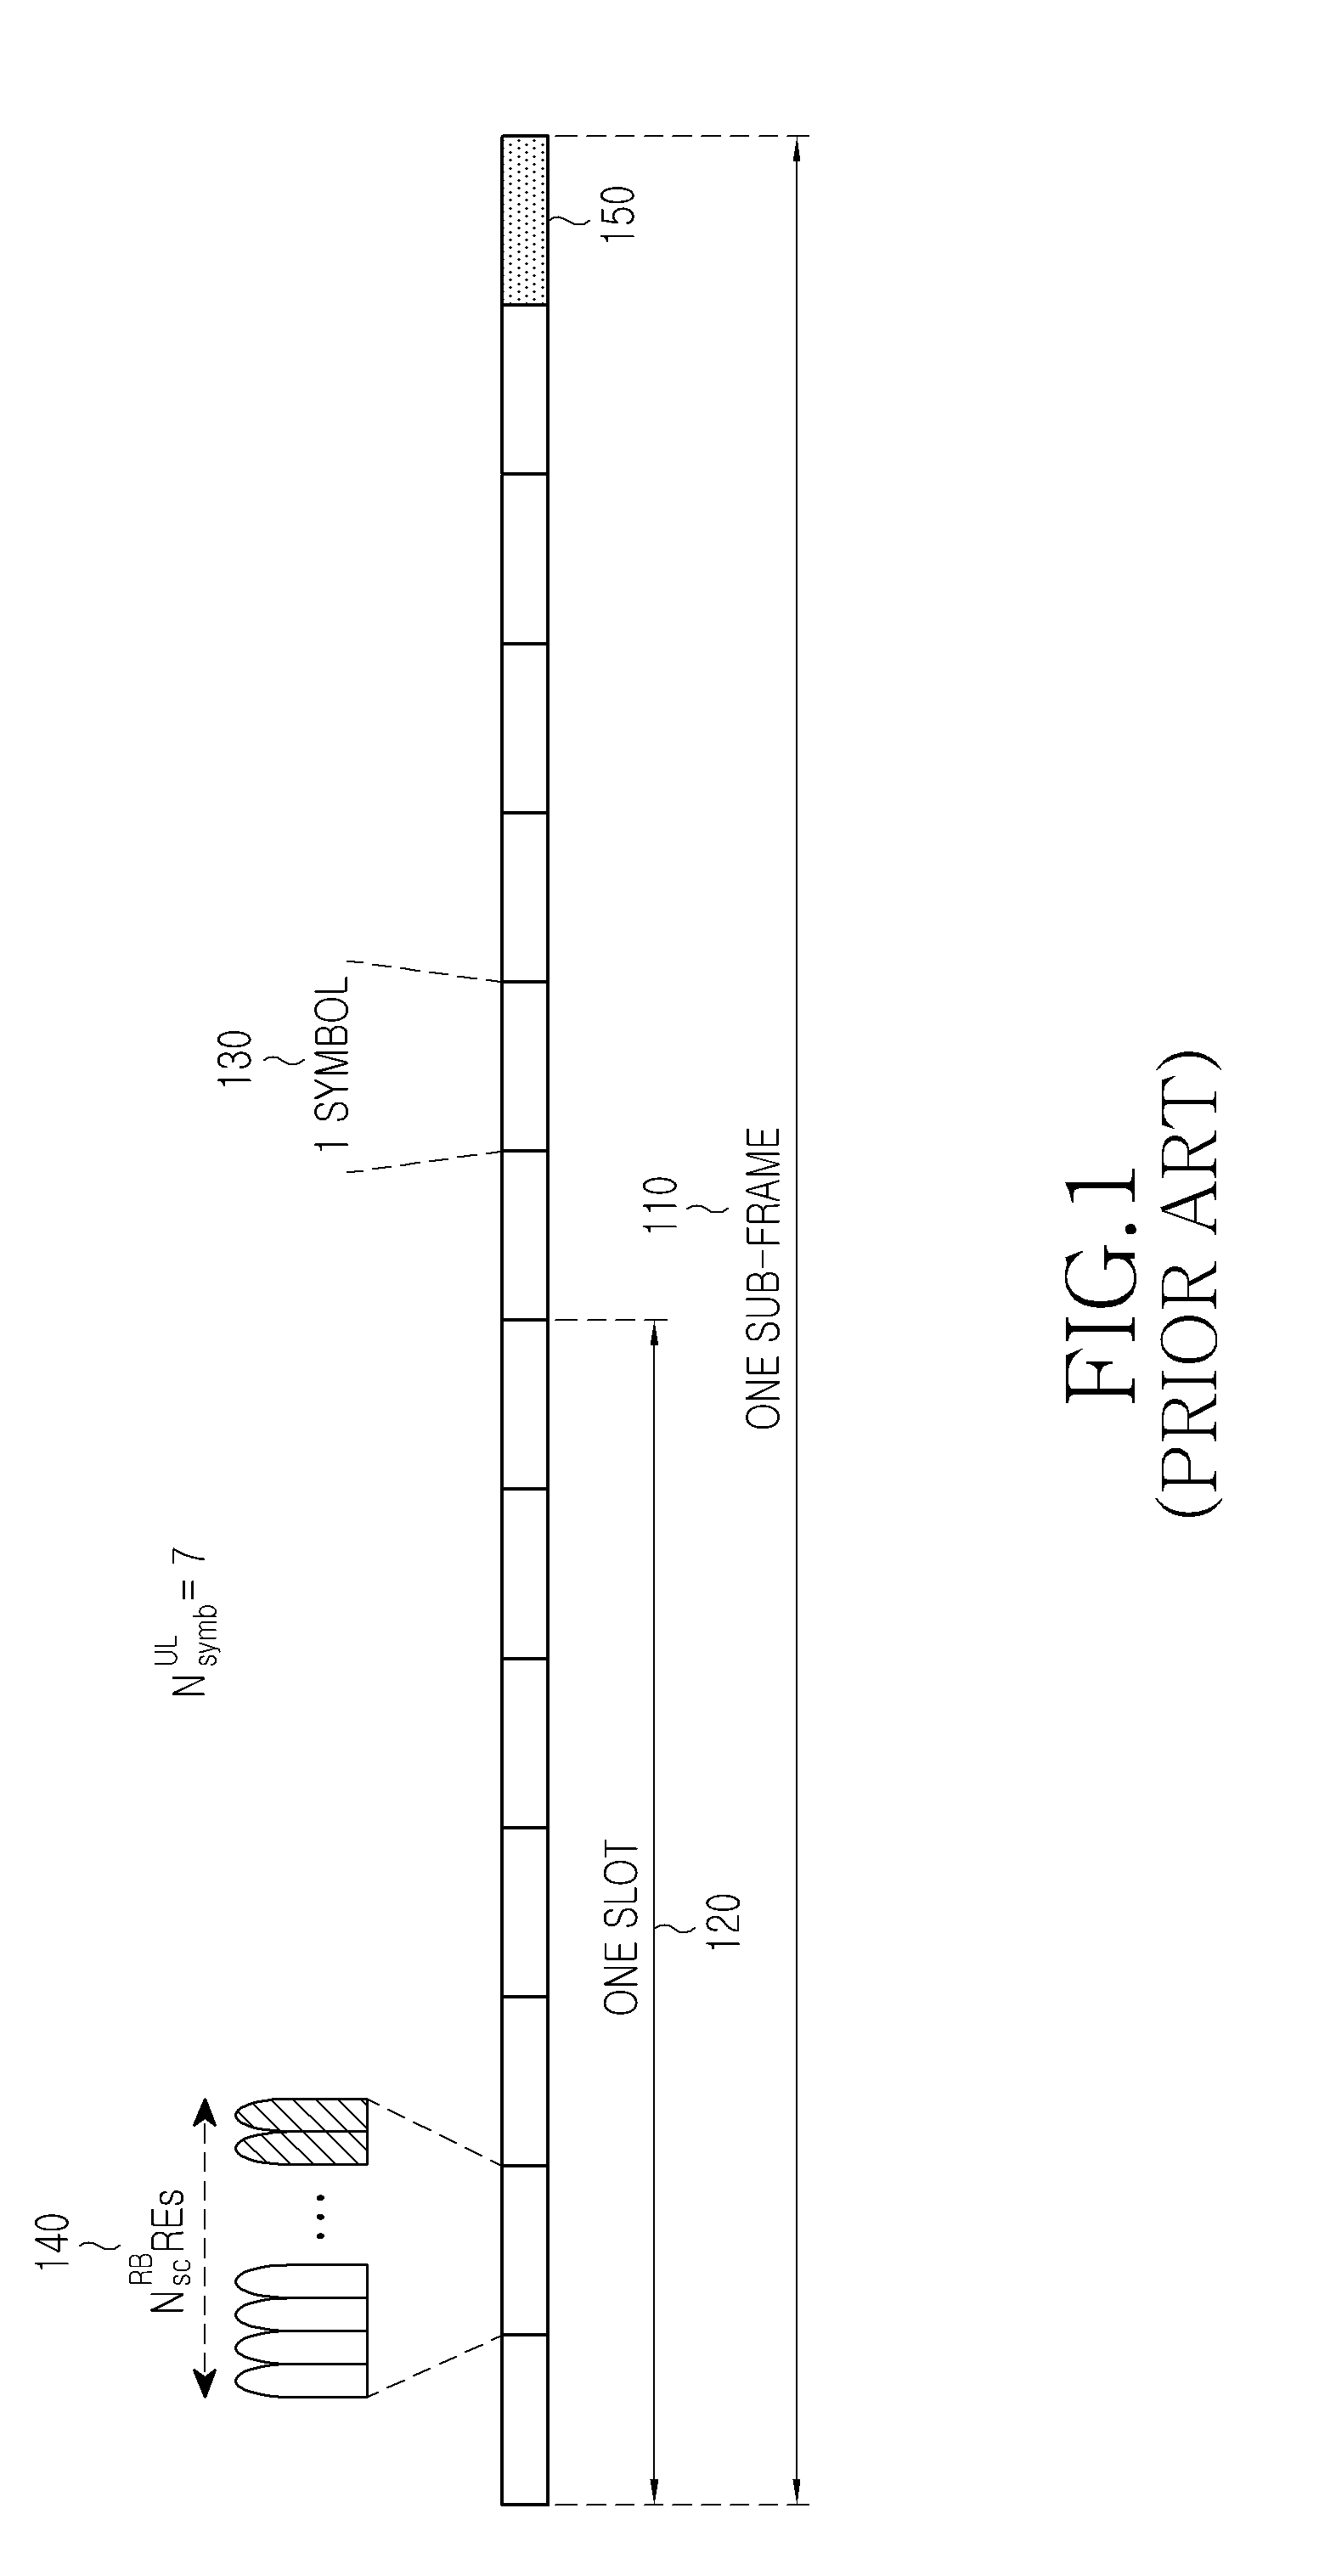 Transmission of uplink control signals in a communication system